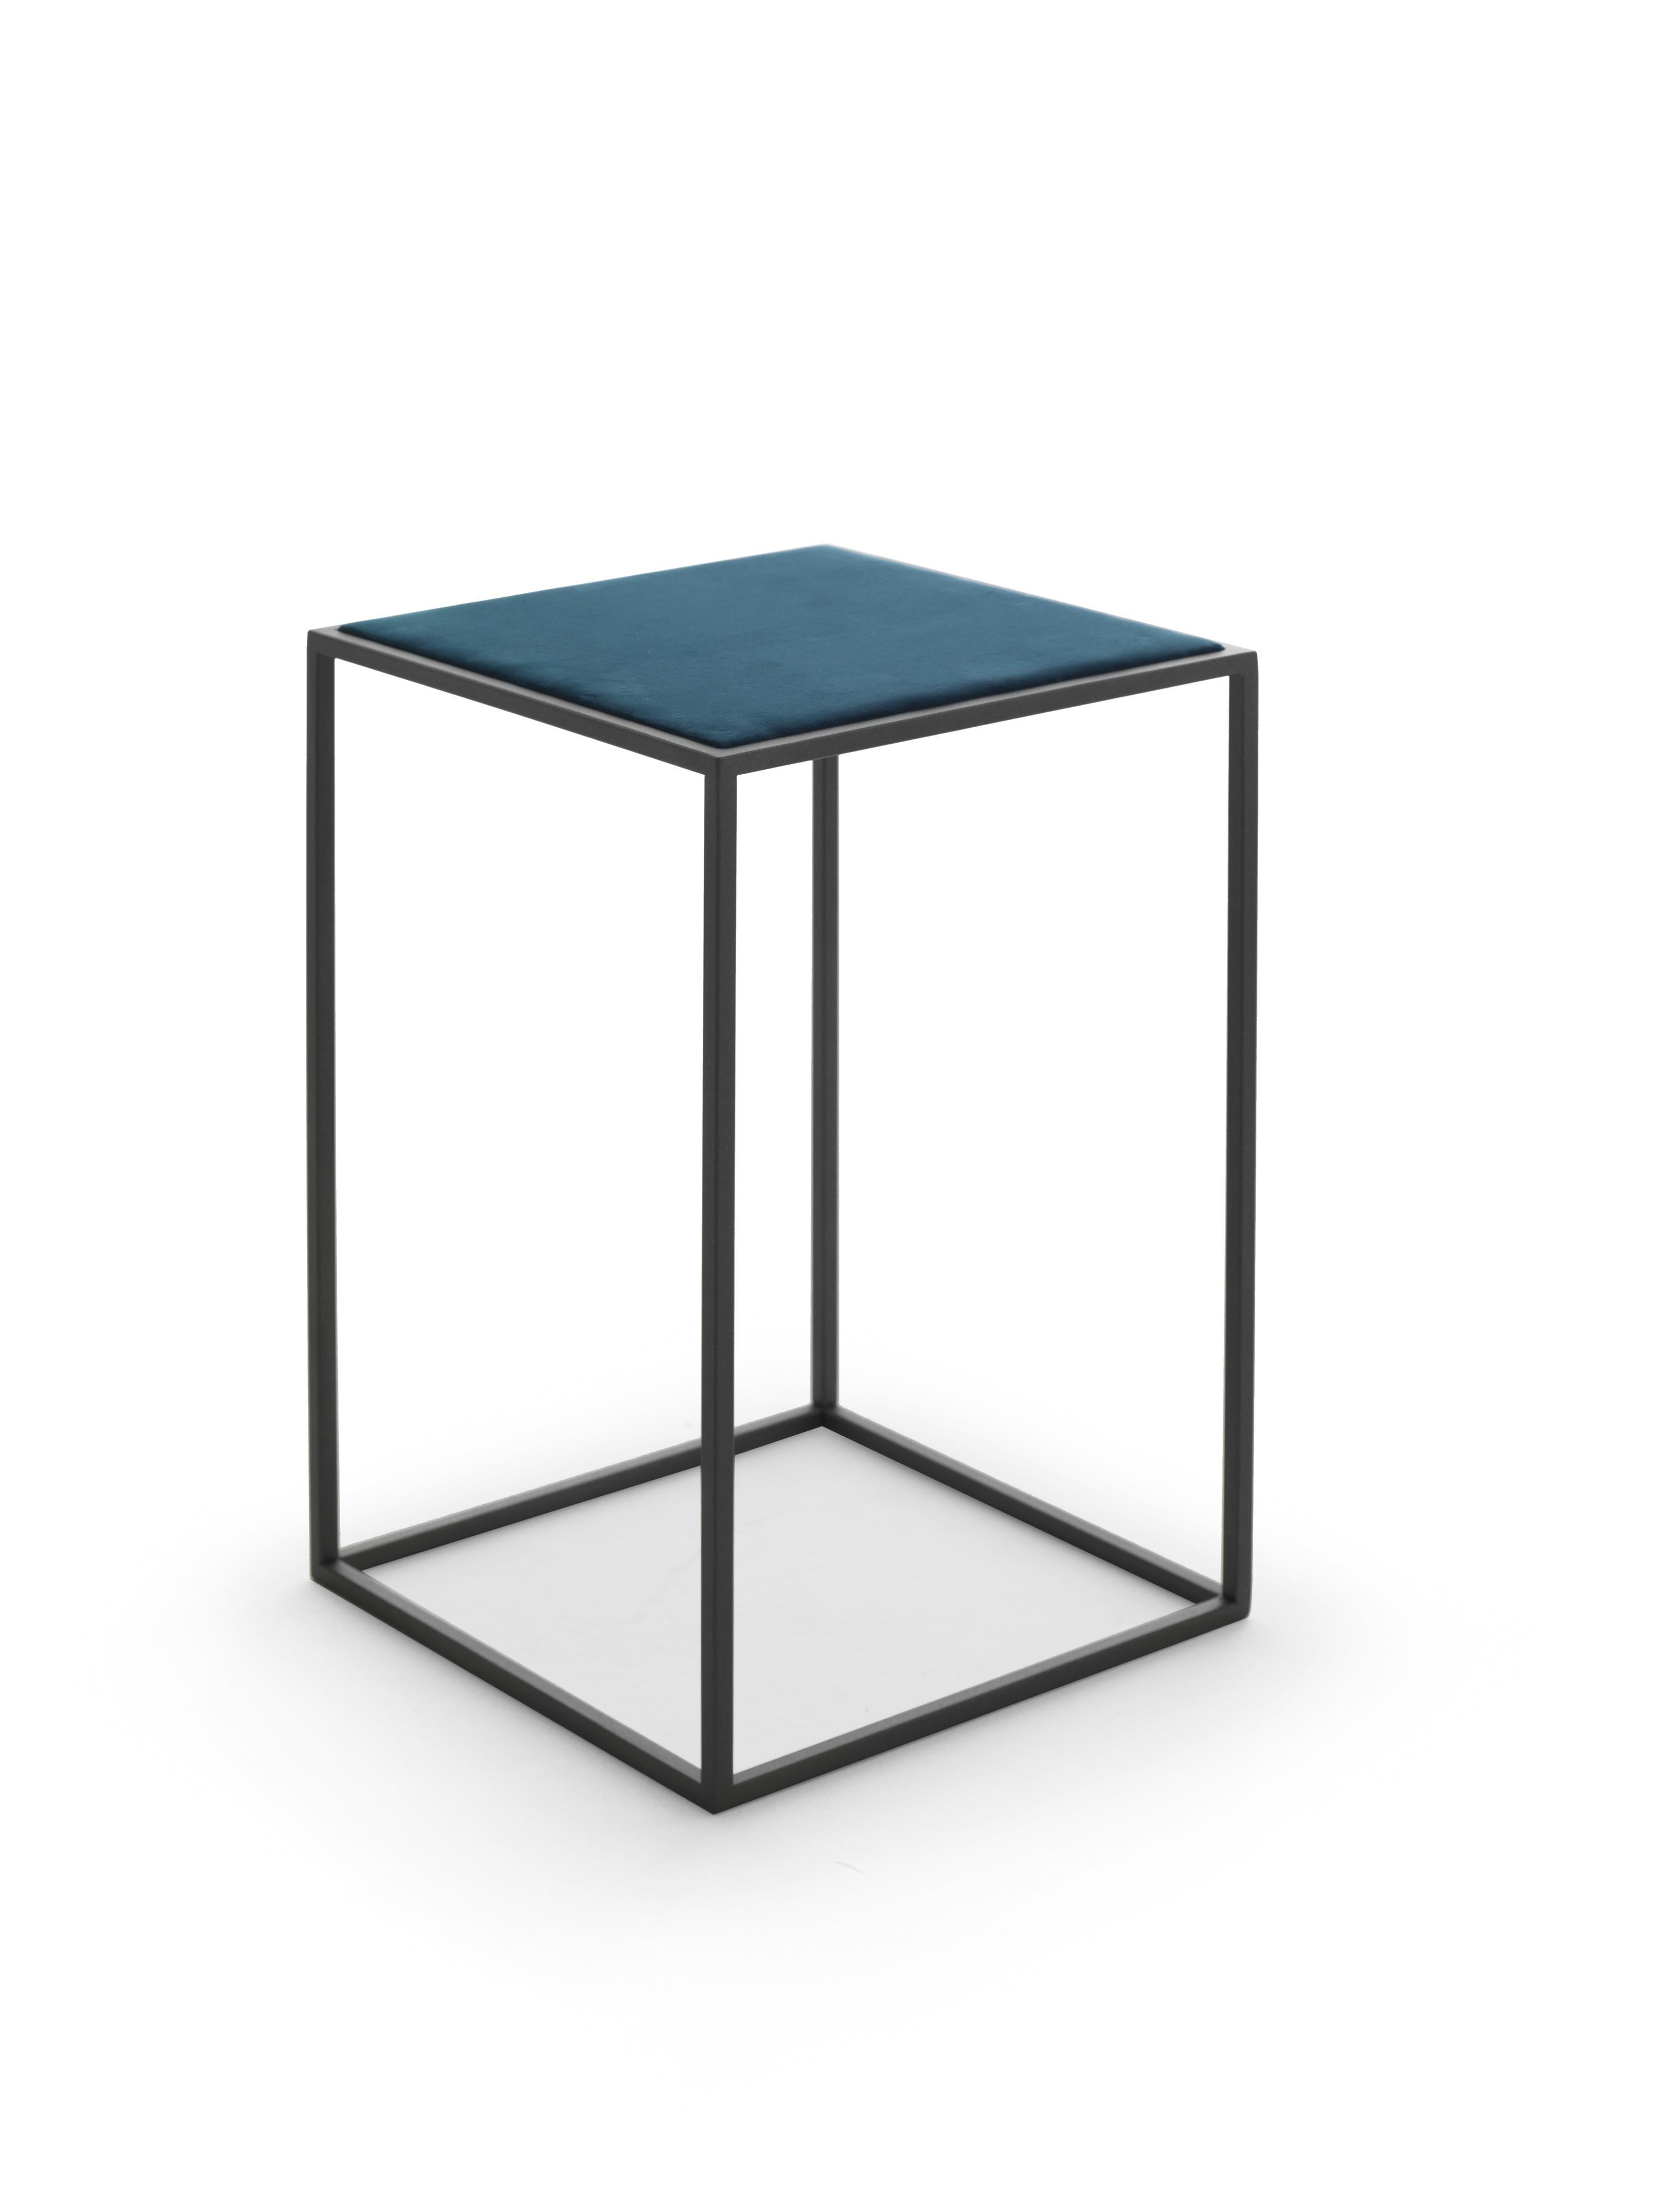 Italian 21st Century Modern Painted Steel Side Tables With Tops In Cotton Velvet For Sale